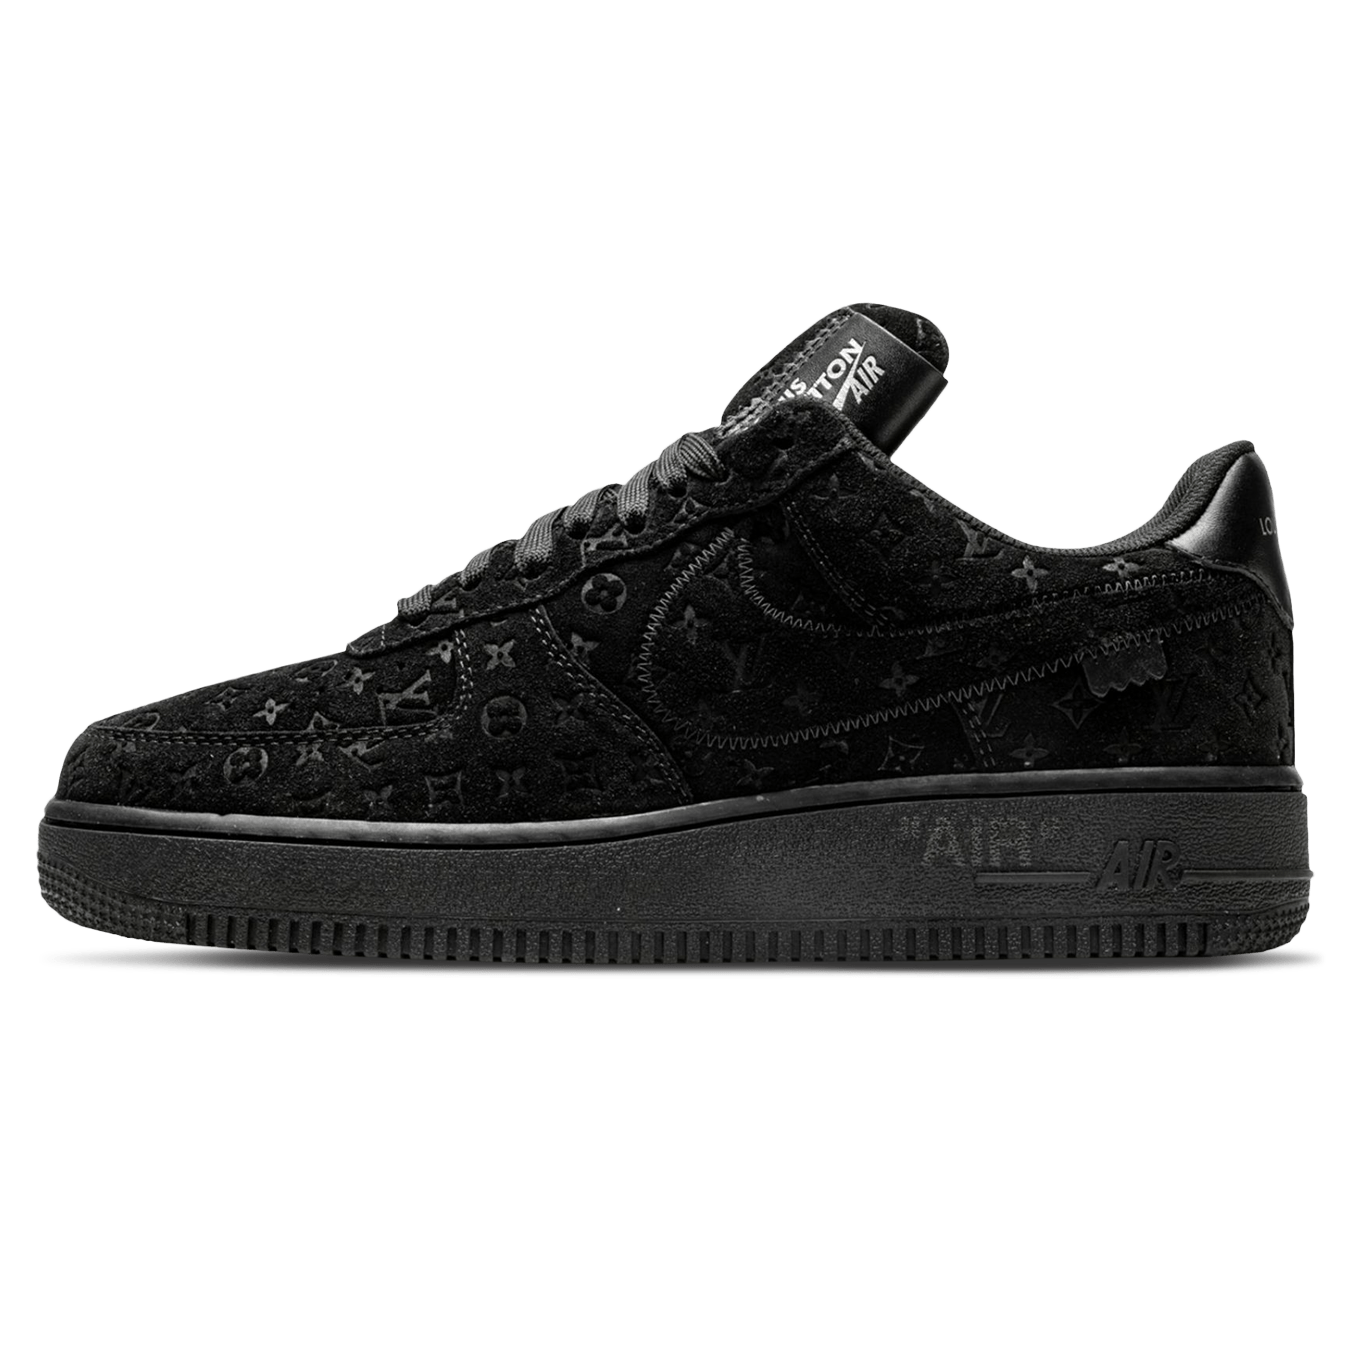 Louis Vuitton x Nike Air Force 1 Low 'Black Anthracite', 1A9VD6